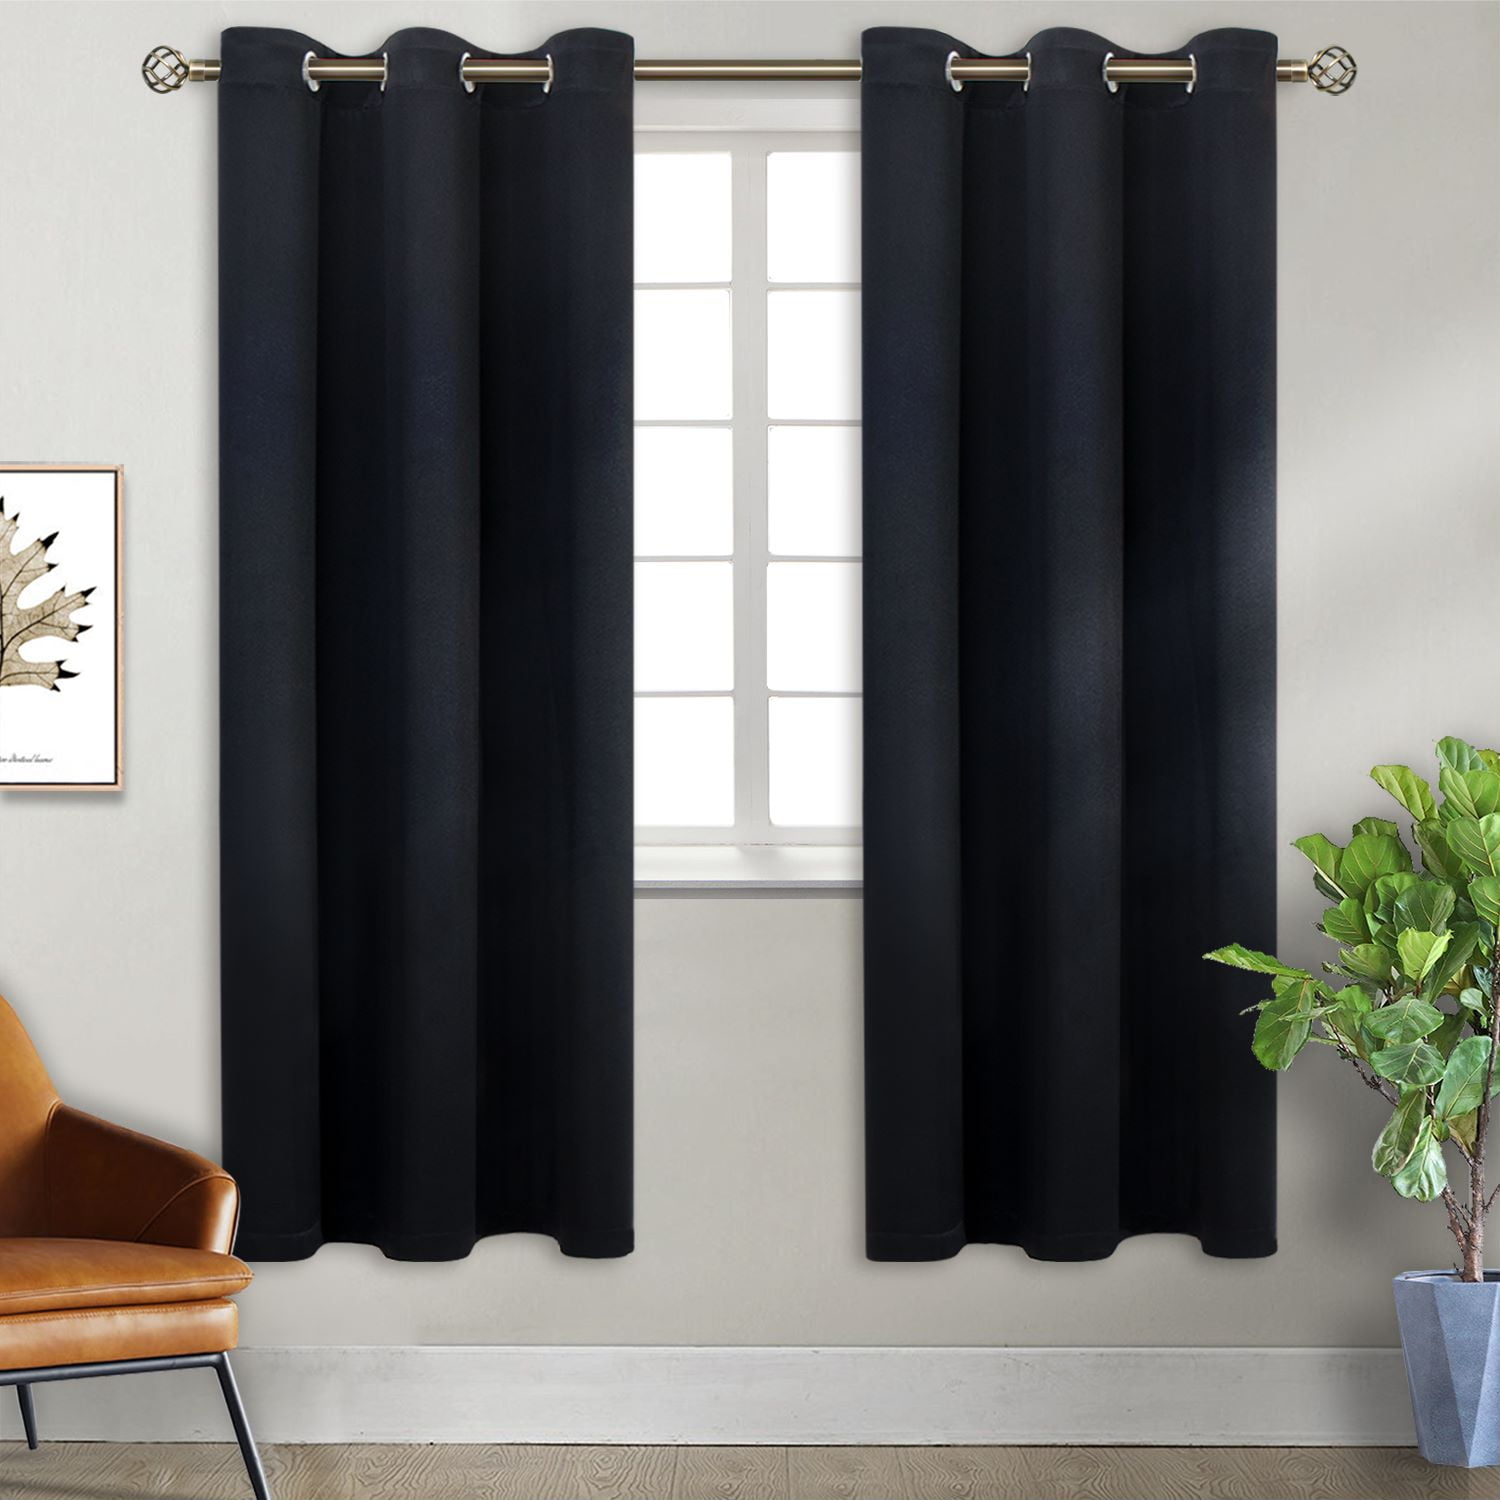 BGment Thermal Insulated Blackout Curtains, Grommet Curtain Panel